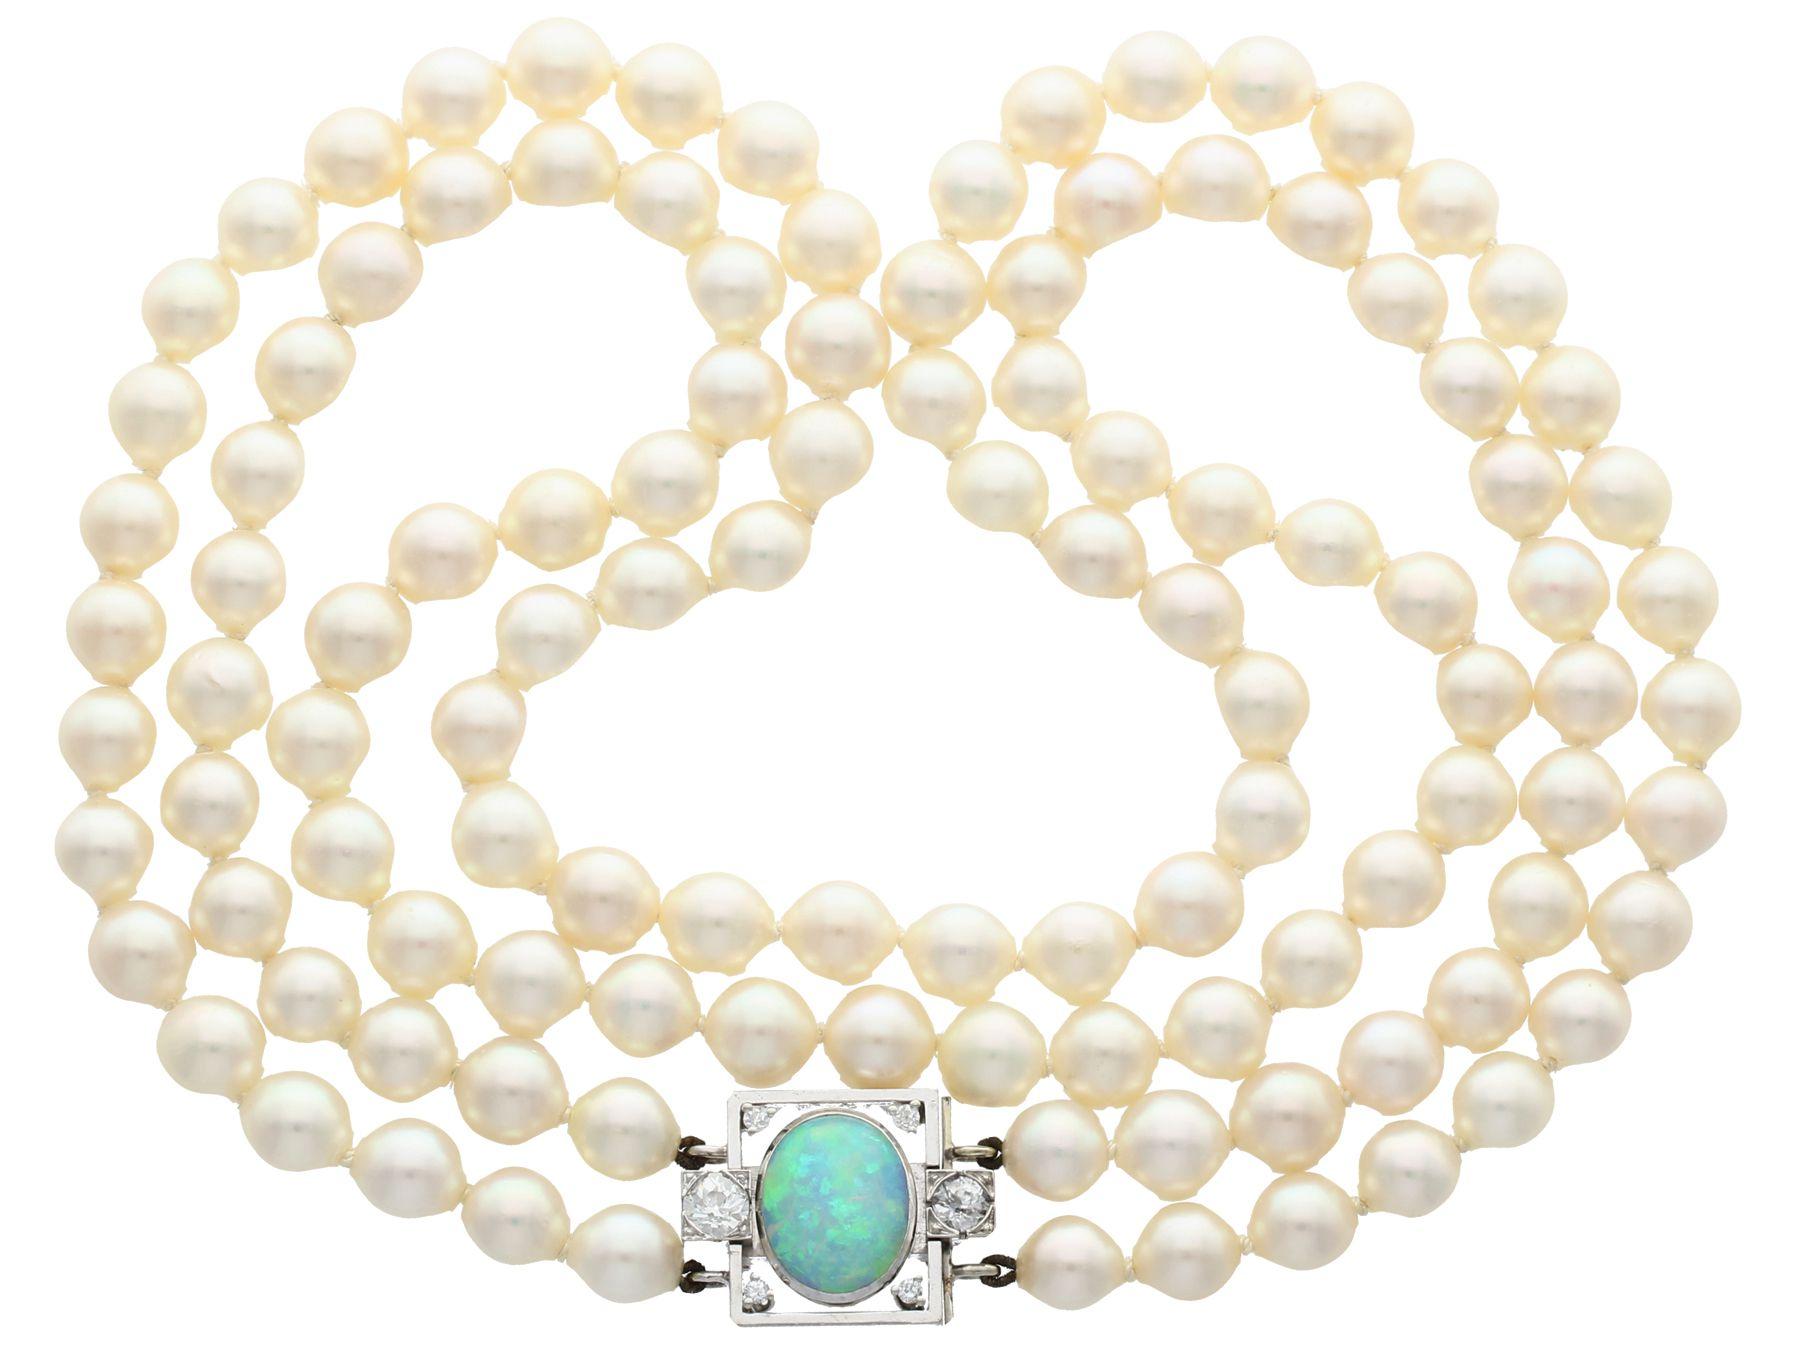 A fine and impressive vintage double strand cultured pearl necklace with an antique 2.01 carat opal and 0.78 carat diamond 18 ct white gold clasp; part of our diverse pearl jewelry collection.

This impressive vintage double strand pearl necklace